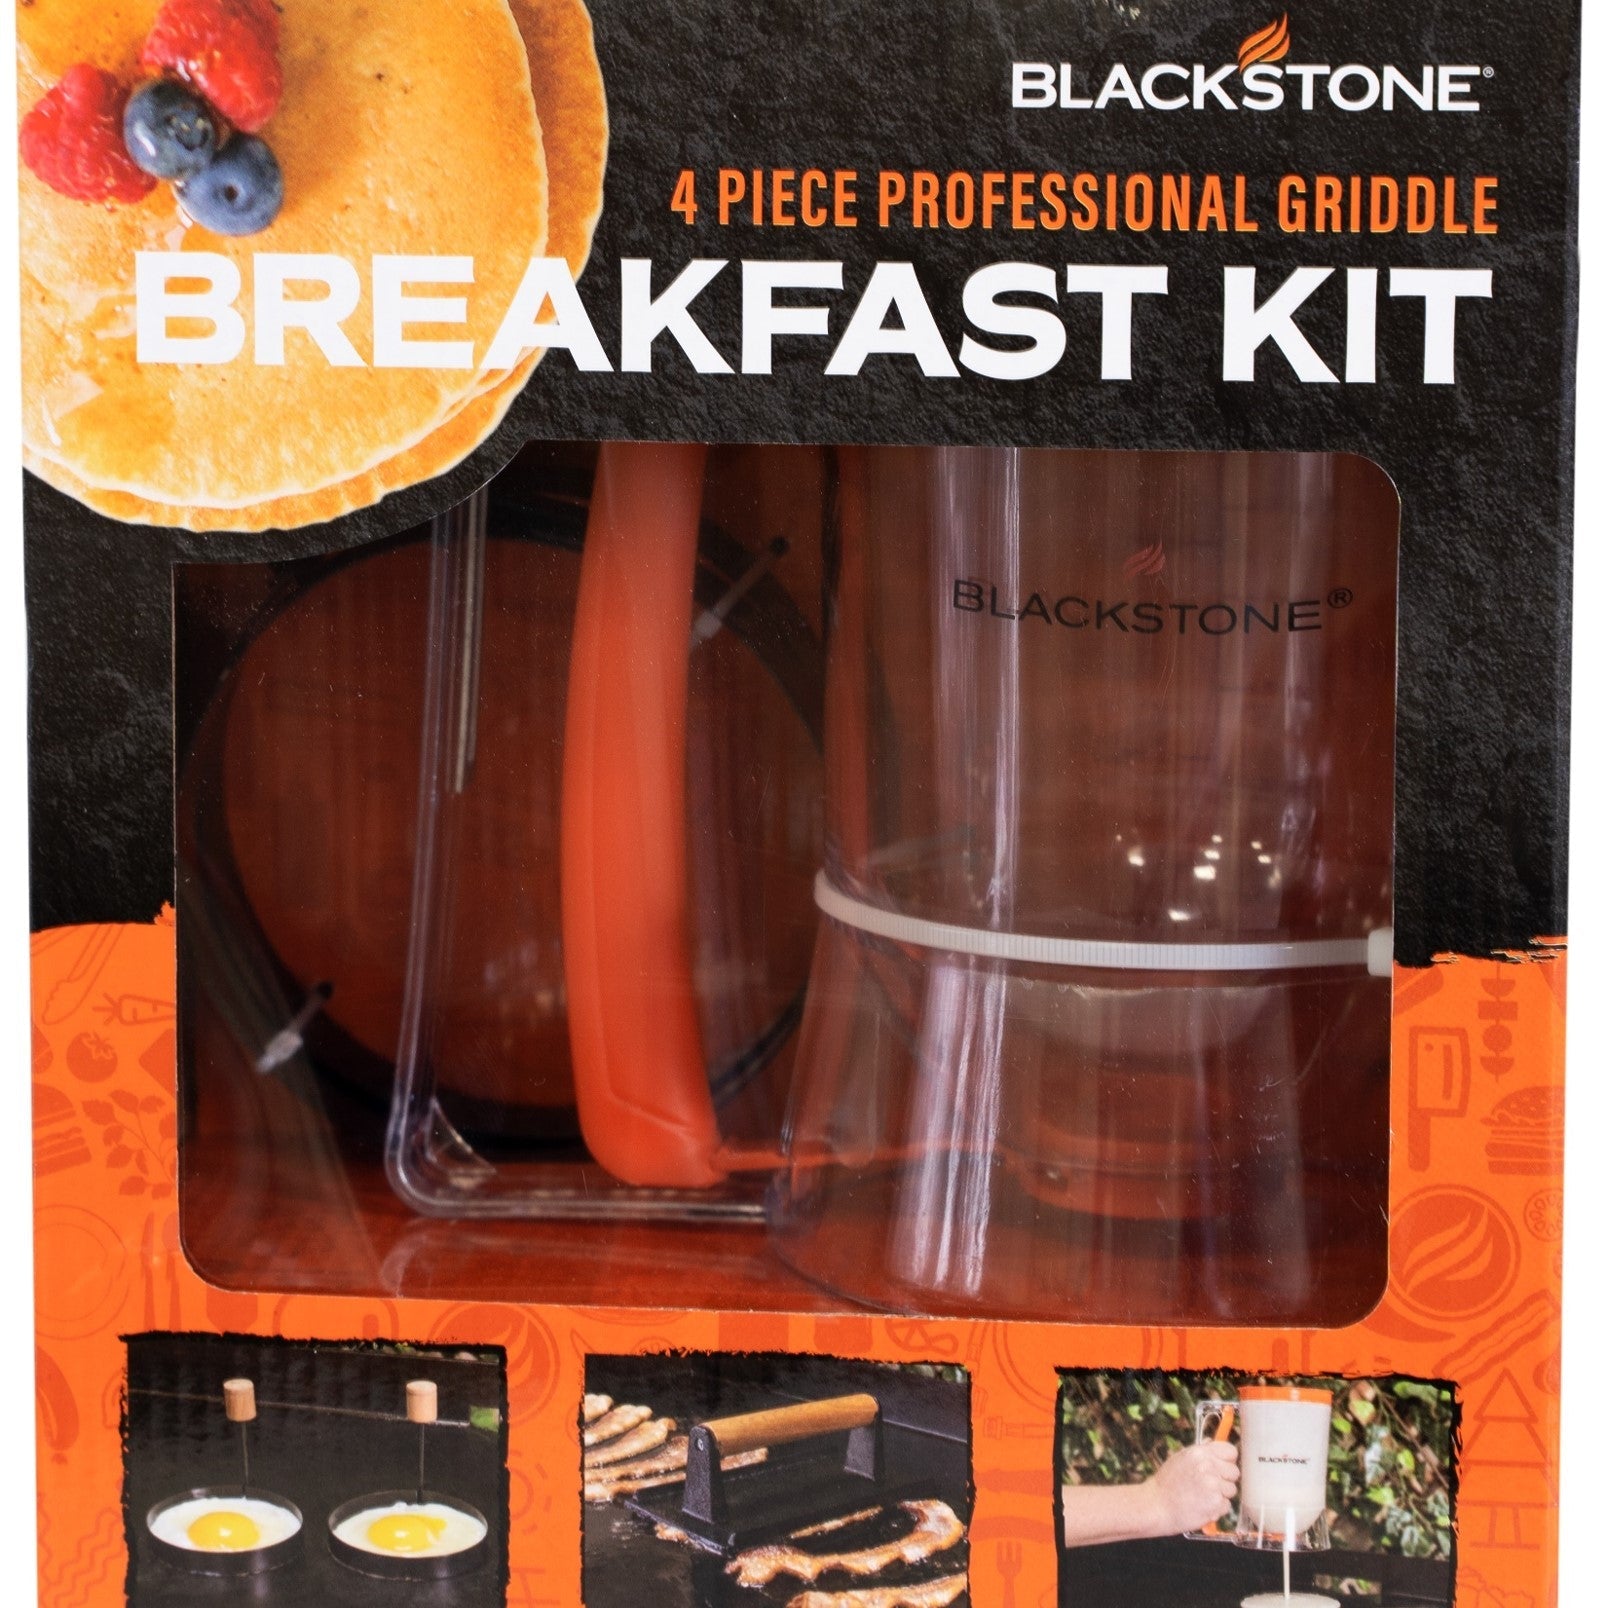 7 Piece Griddle Breakfast Kit for Blackstone, Griddle Accessories Set -  Included